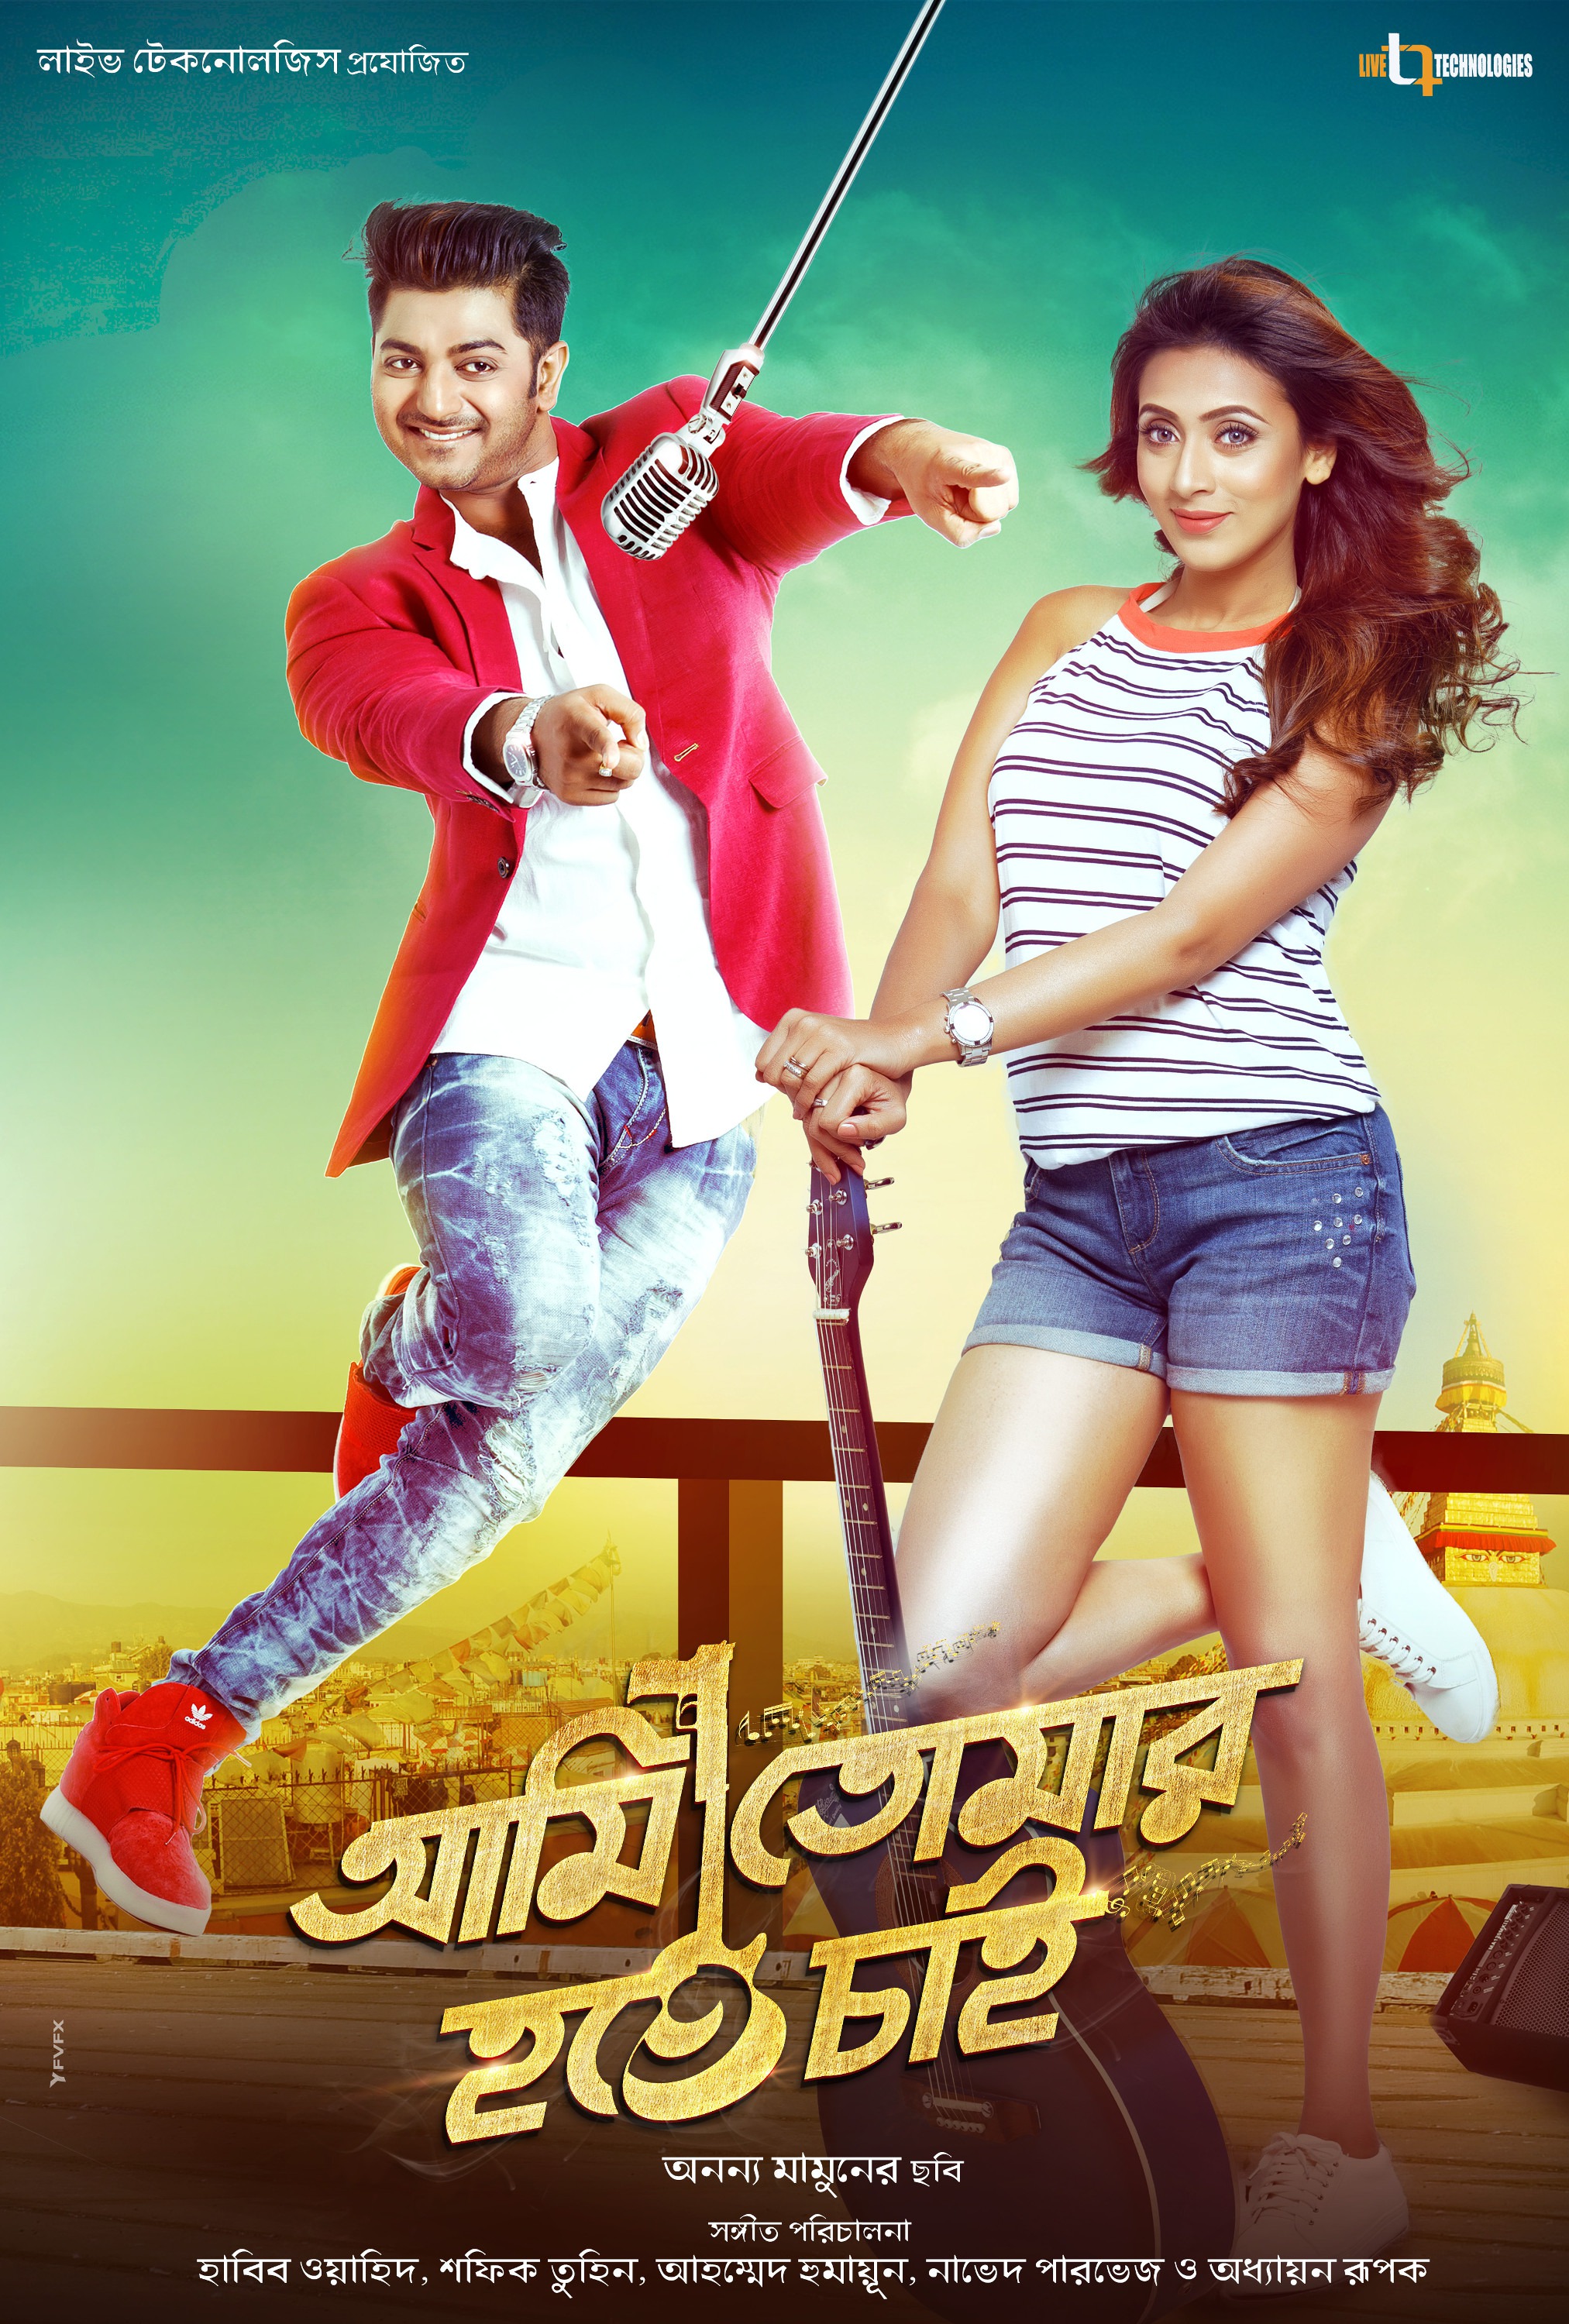 Mega Sized Movie Poster Image for Ami Tomar Hote Chai (#7 of 11)